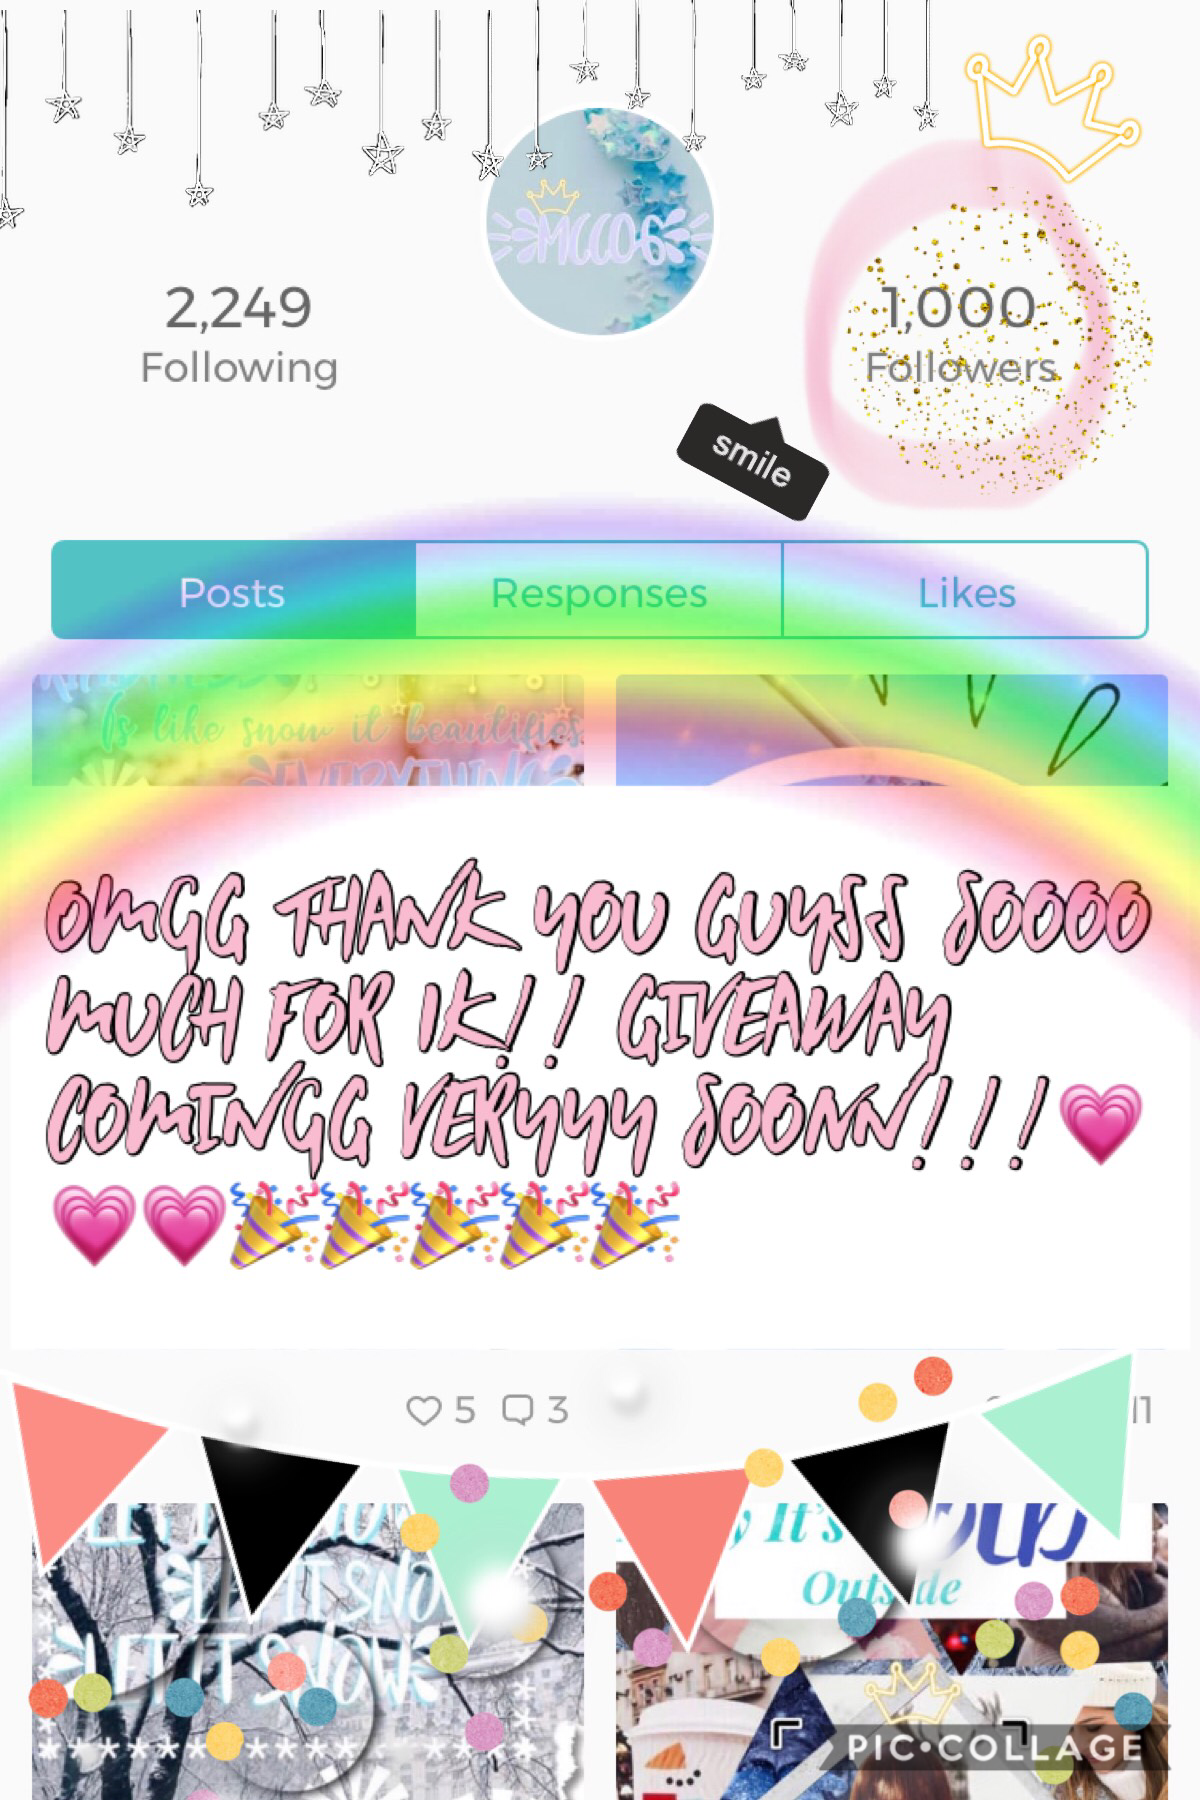 TAPPP🎉💜🥳
OMGGG WE JUST HIT 1K!! ILYGSMMM!!! AHHH I CANT BELIEVE IT!! PARTY TIME!!!!🥳🥳🥳🥳🥳🥳💜💜💗💗♥️♥️🥰🥰🎉🎉🎊🎊🎊